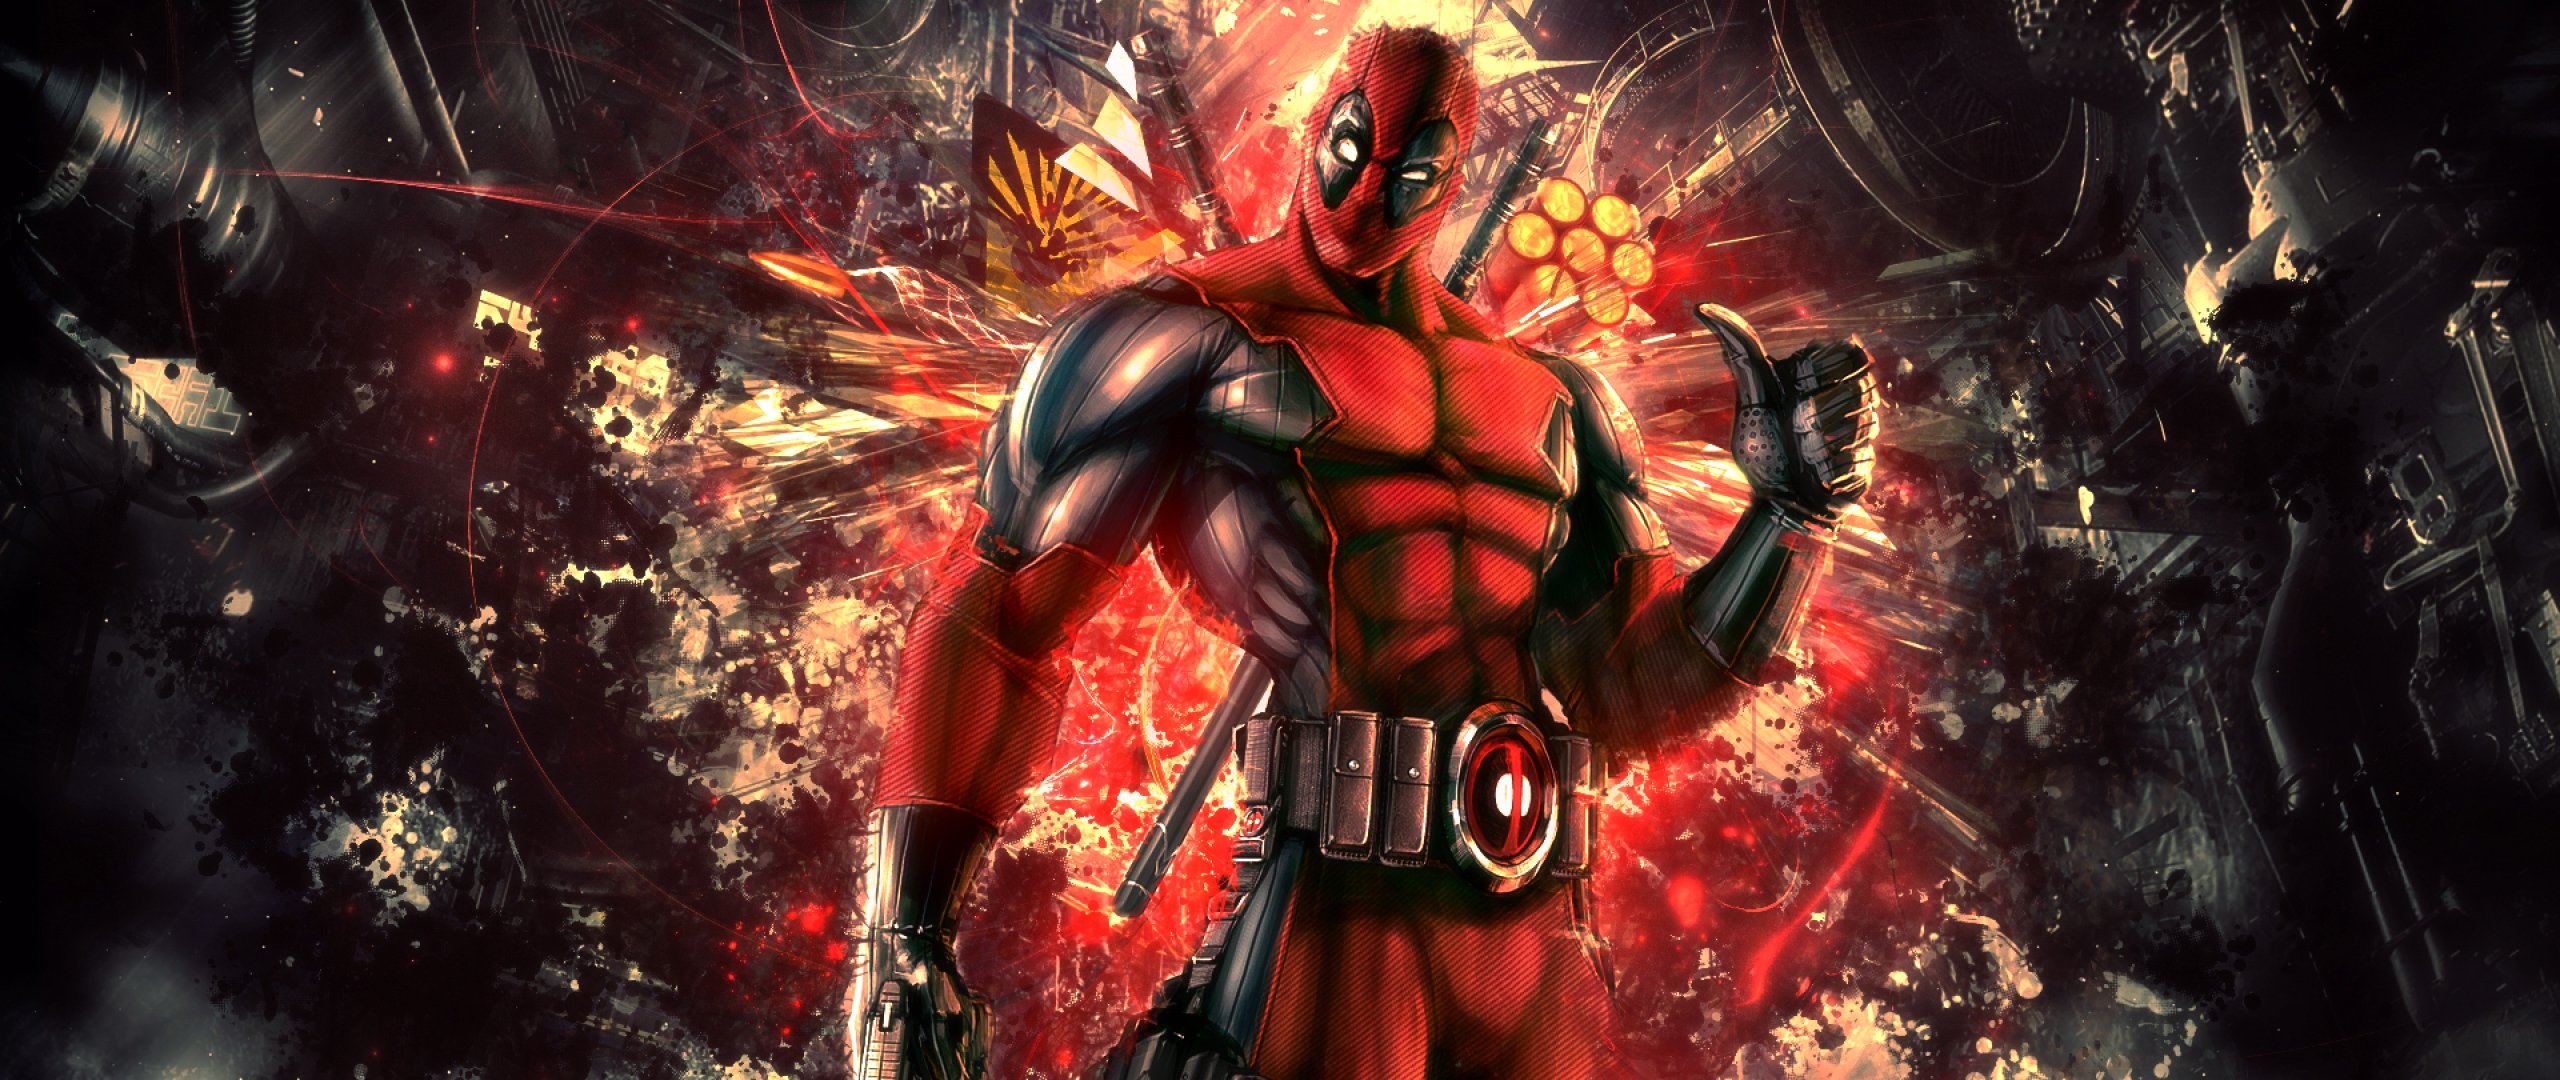 deadpool, comics, merc with a mouth, wade wilson cell phone wallpapers